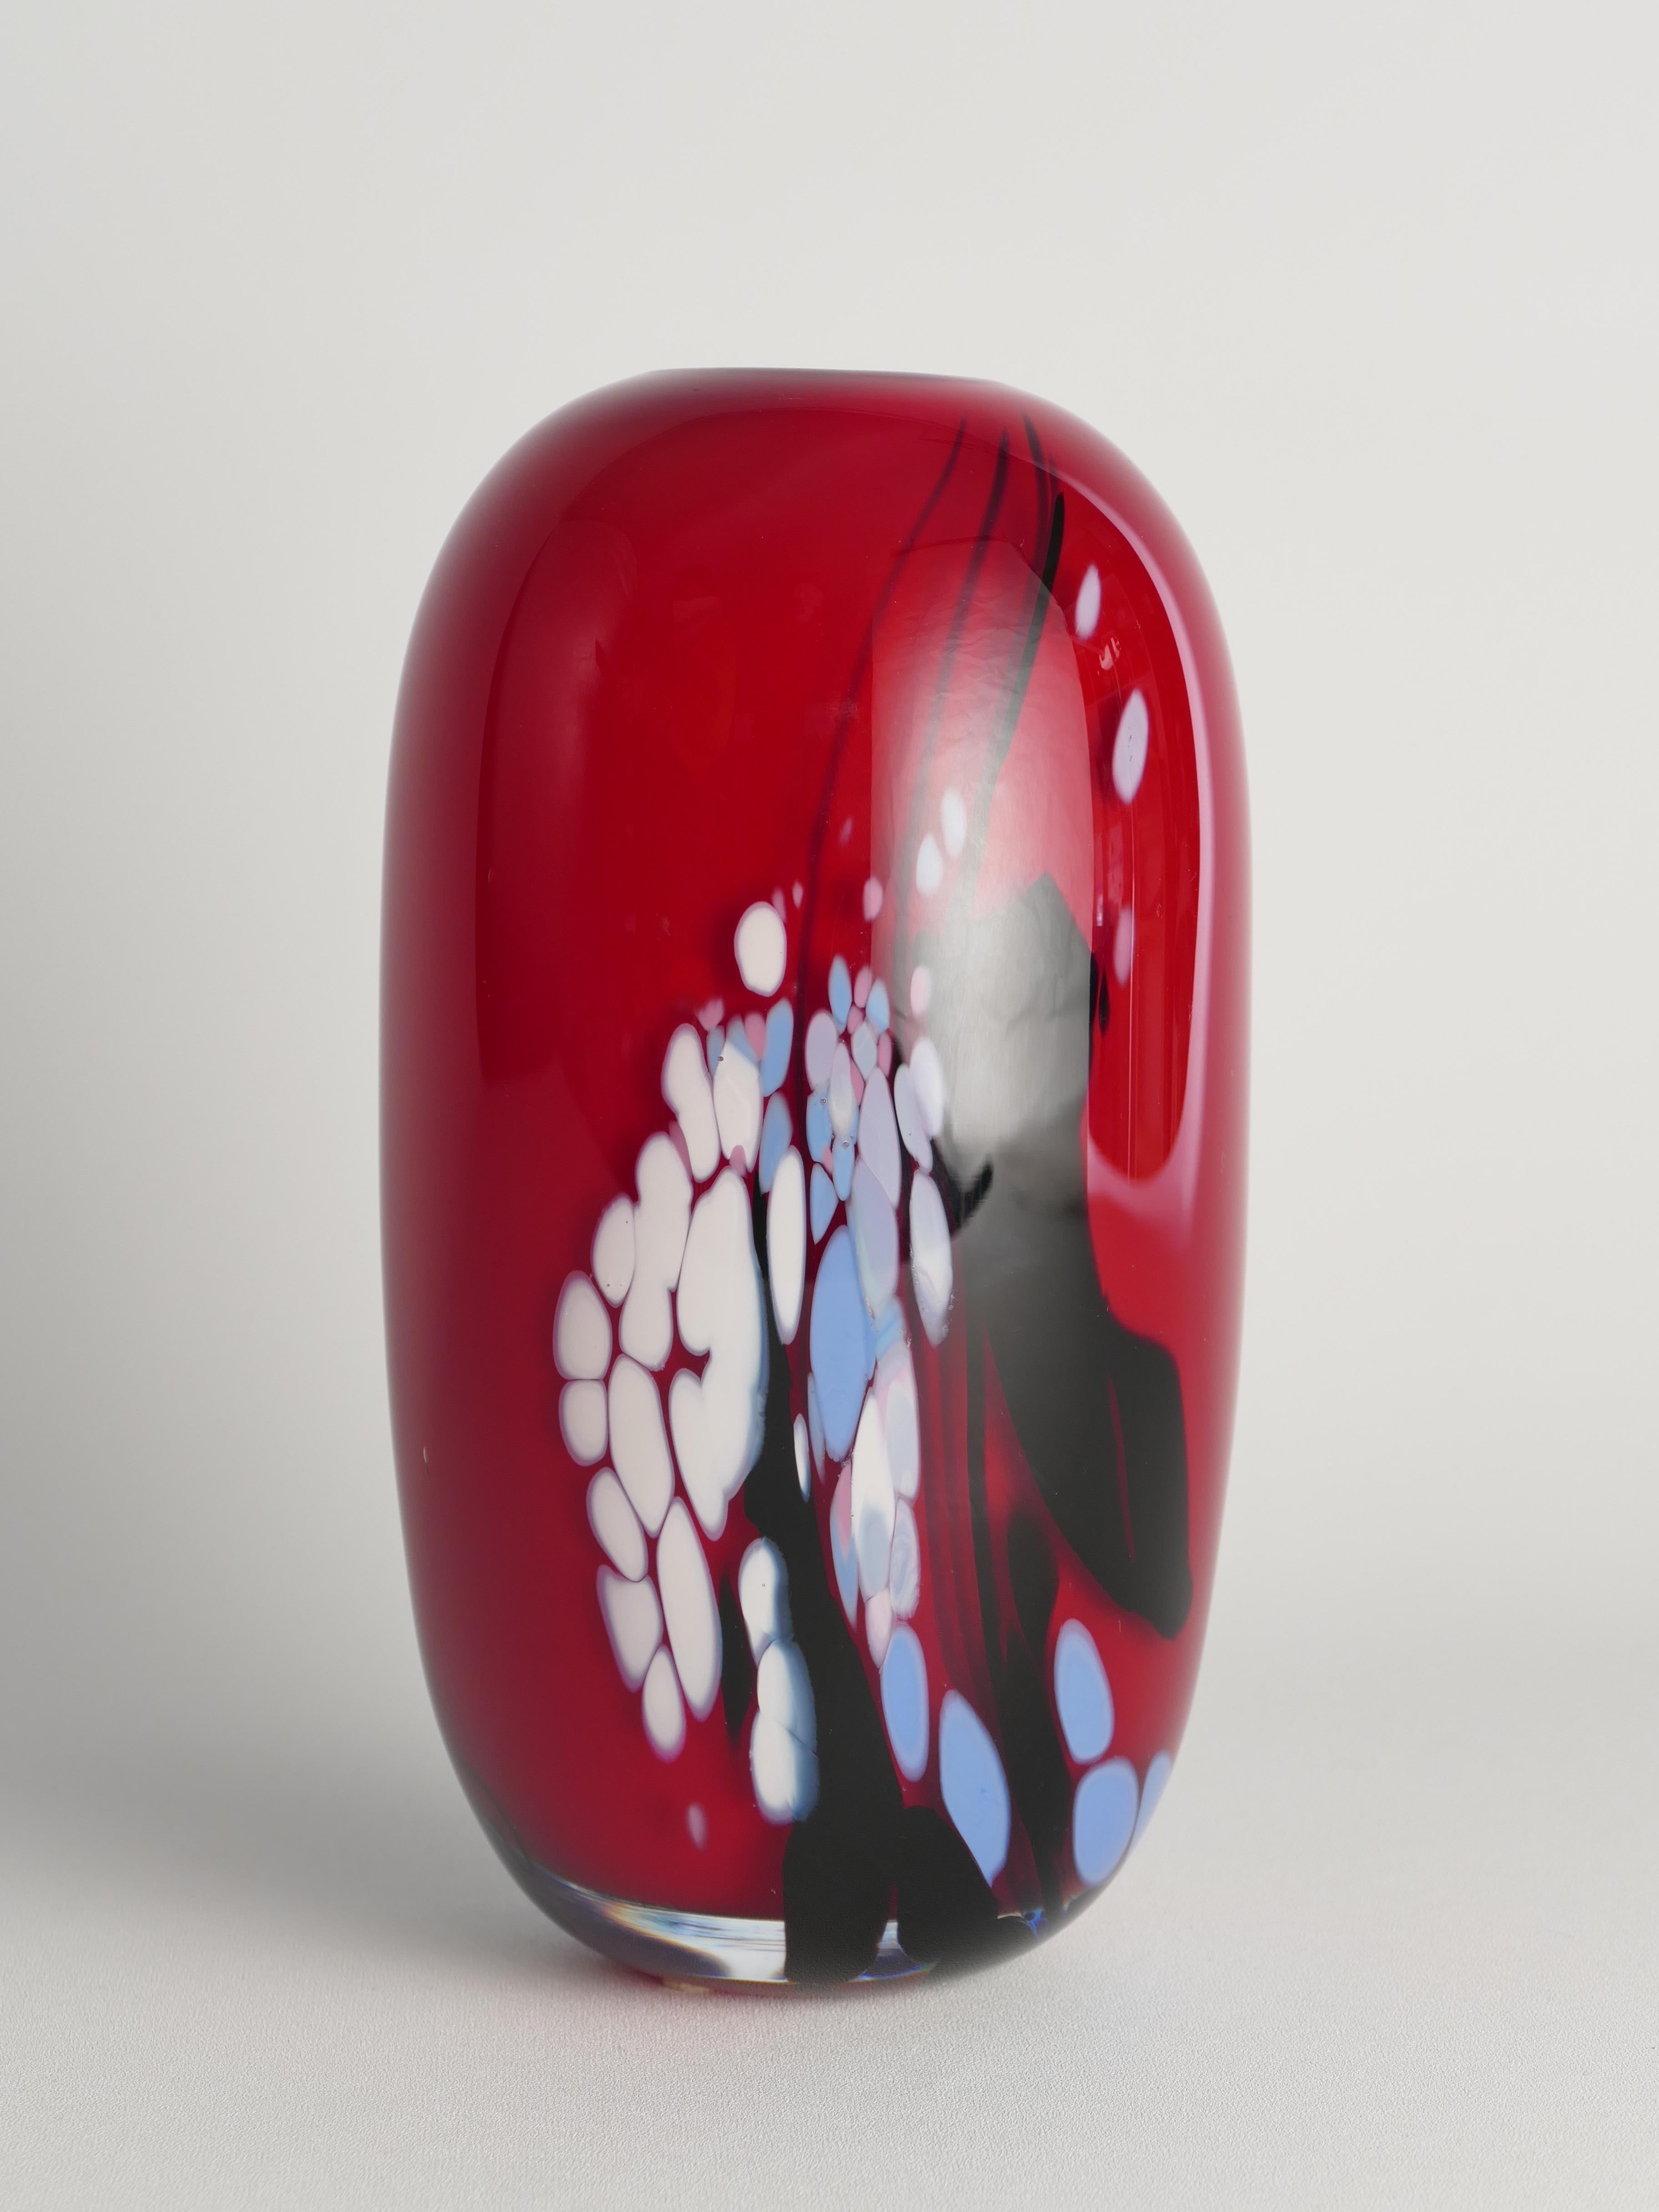 Unique Cherry Red Art Glass Vase by Mikael Axenbrant, Sweden 1990 For Sale 6